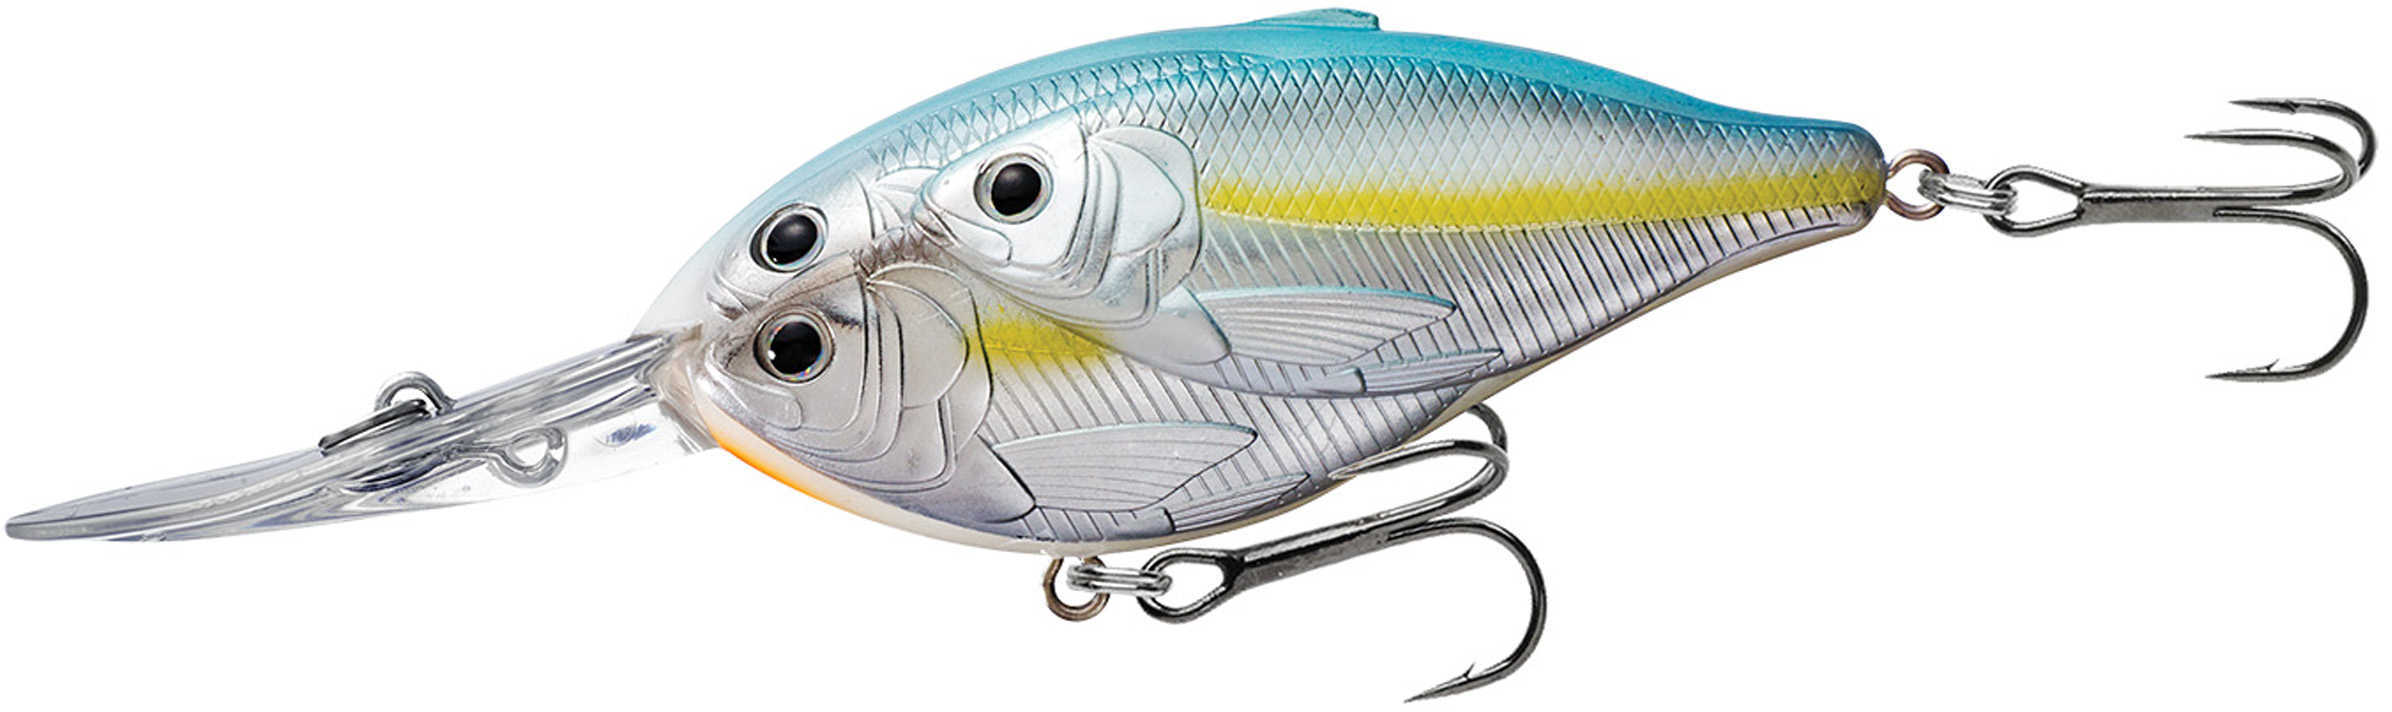 LIVETARGET Lures / Koppers Fishing and Tackle Corp Threadfin Shad Crankbait 2 3/4" Number 4 Hook Size 12 Depth Metallic Pearl/Blue